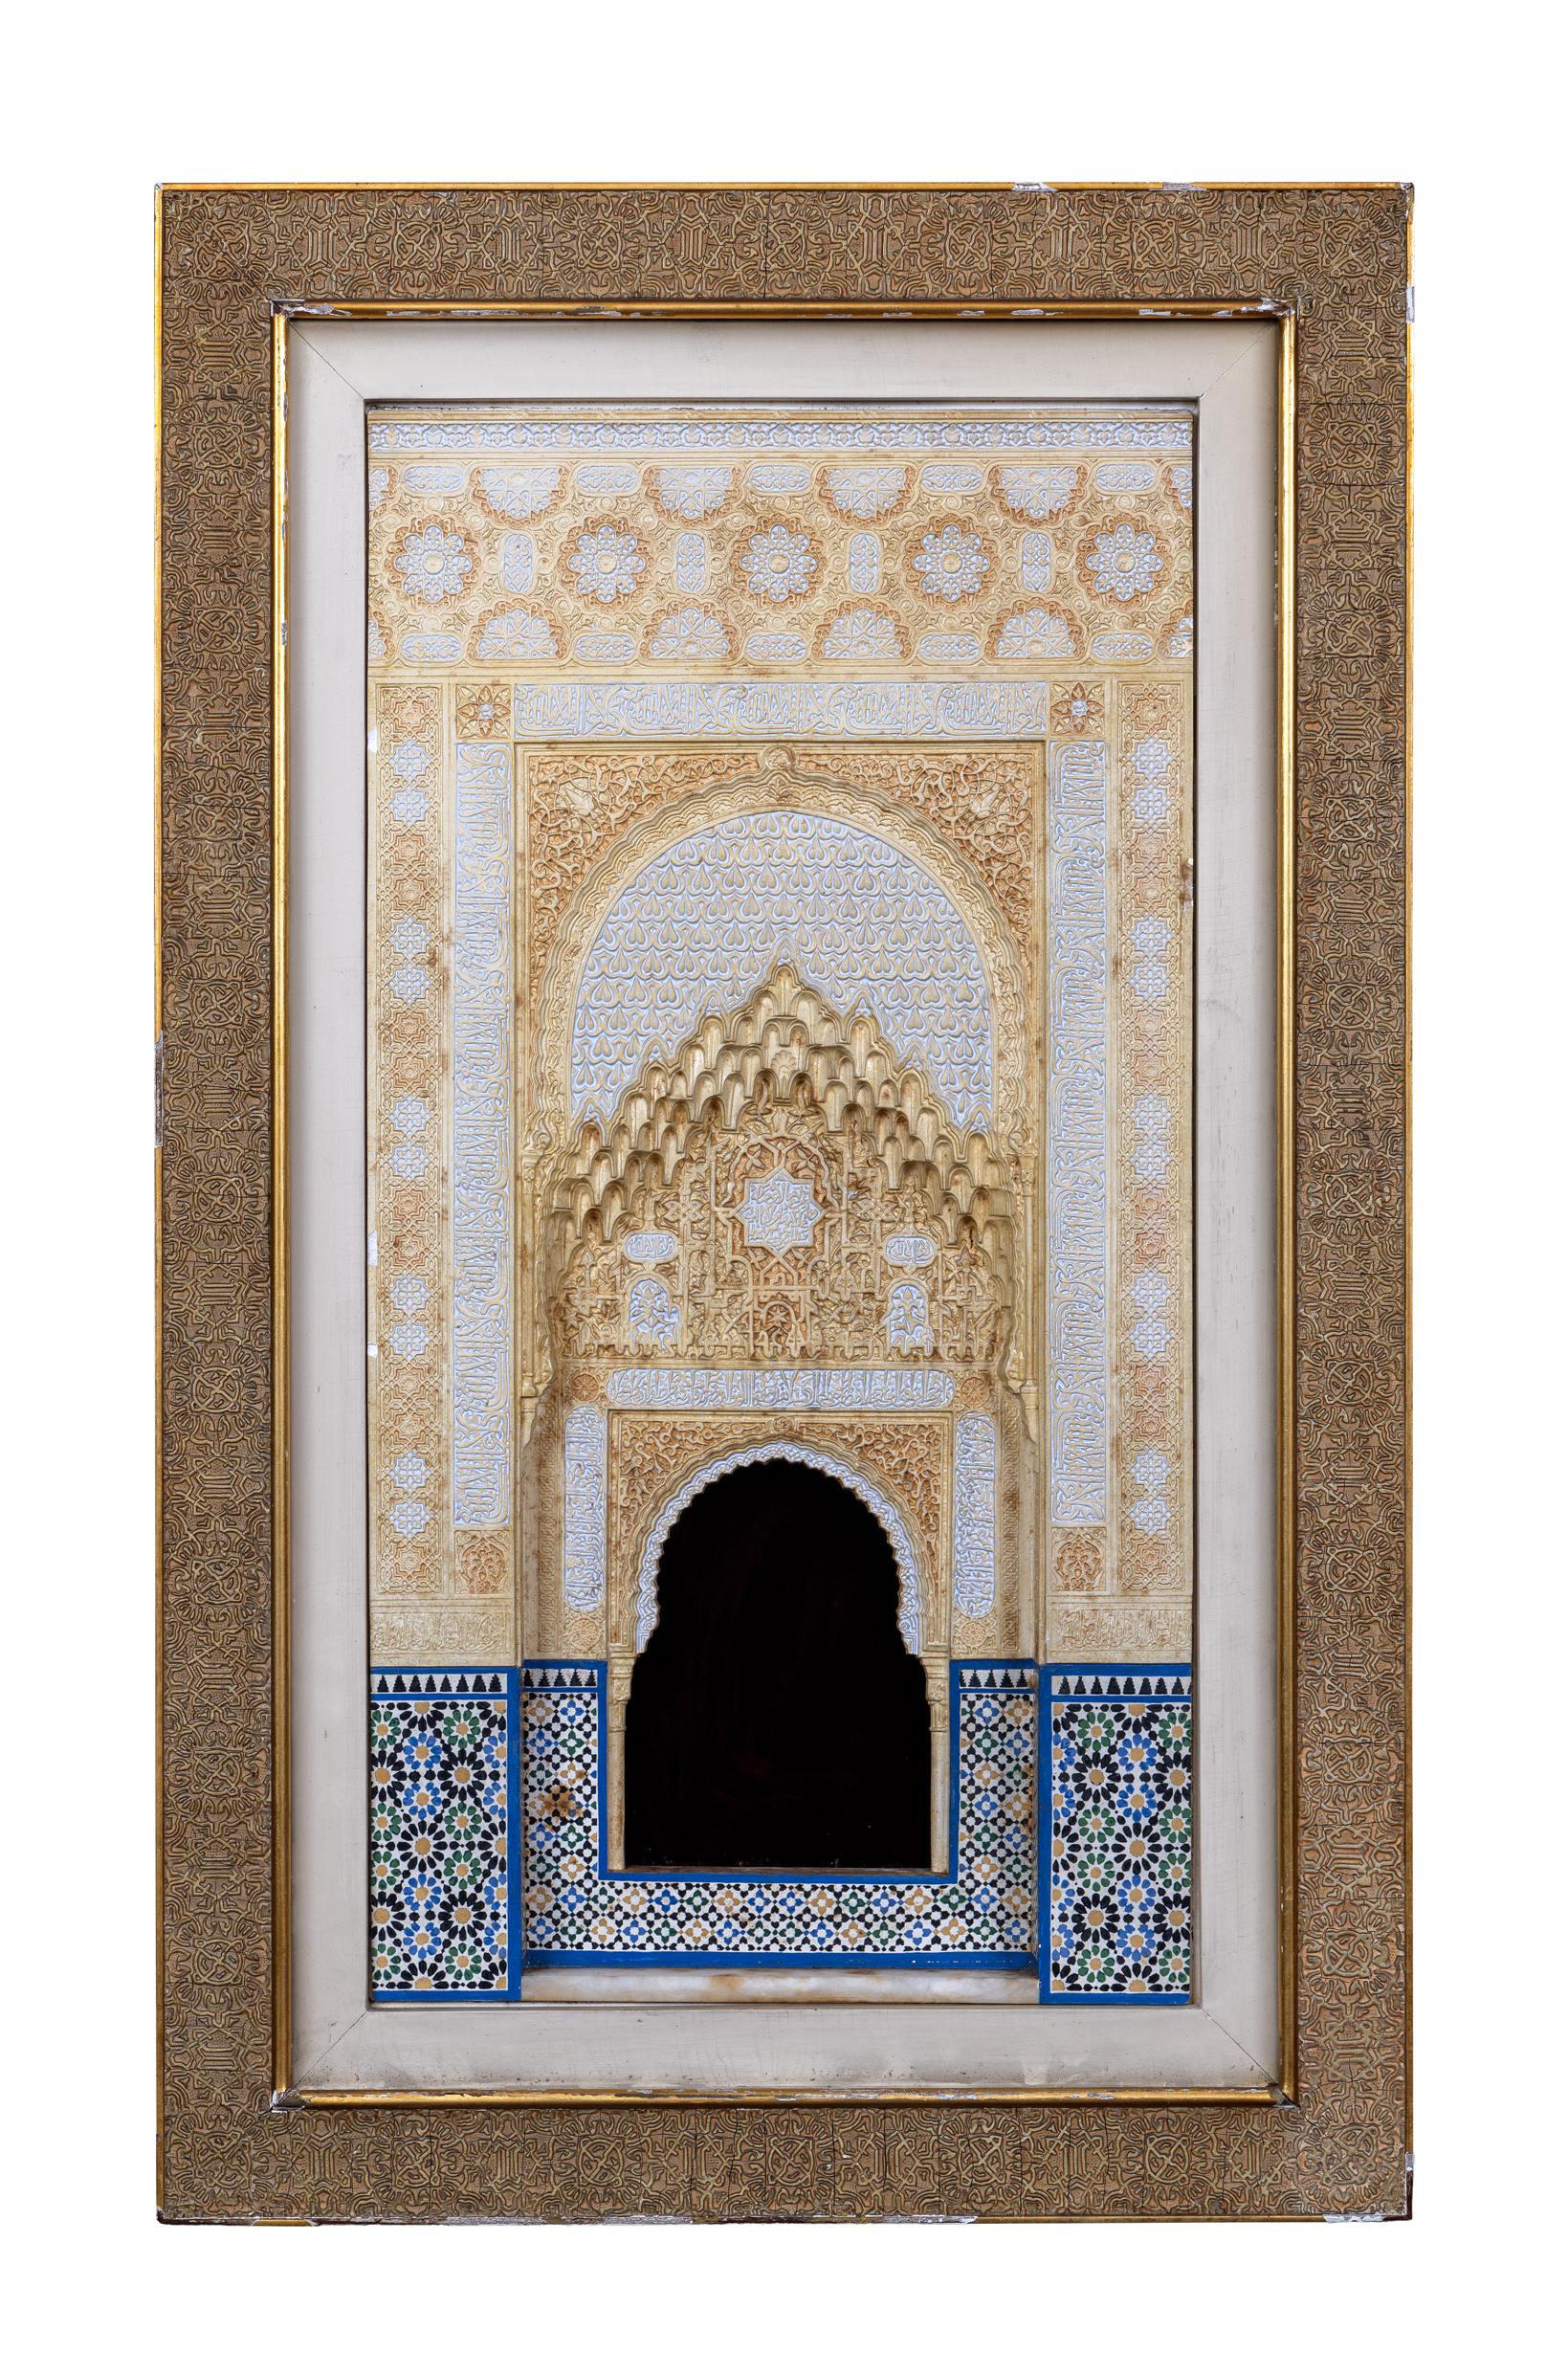 A Large Spanish Alhambra Architectural Model Plaque - Mixed Media Art by Rafael Contreras